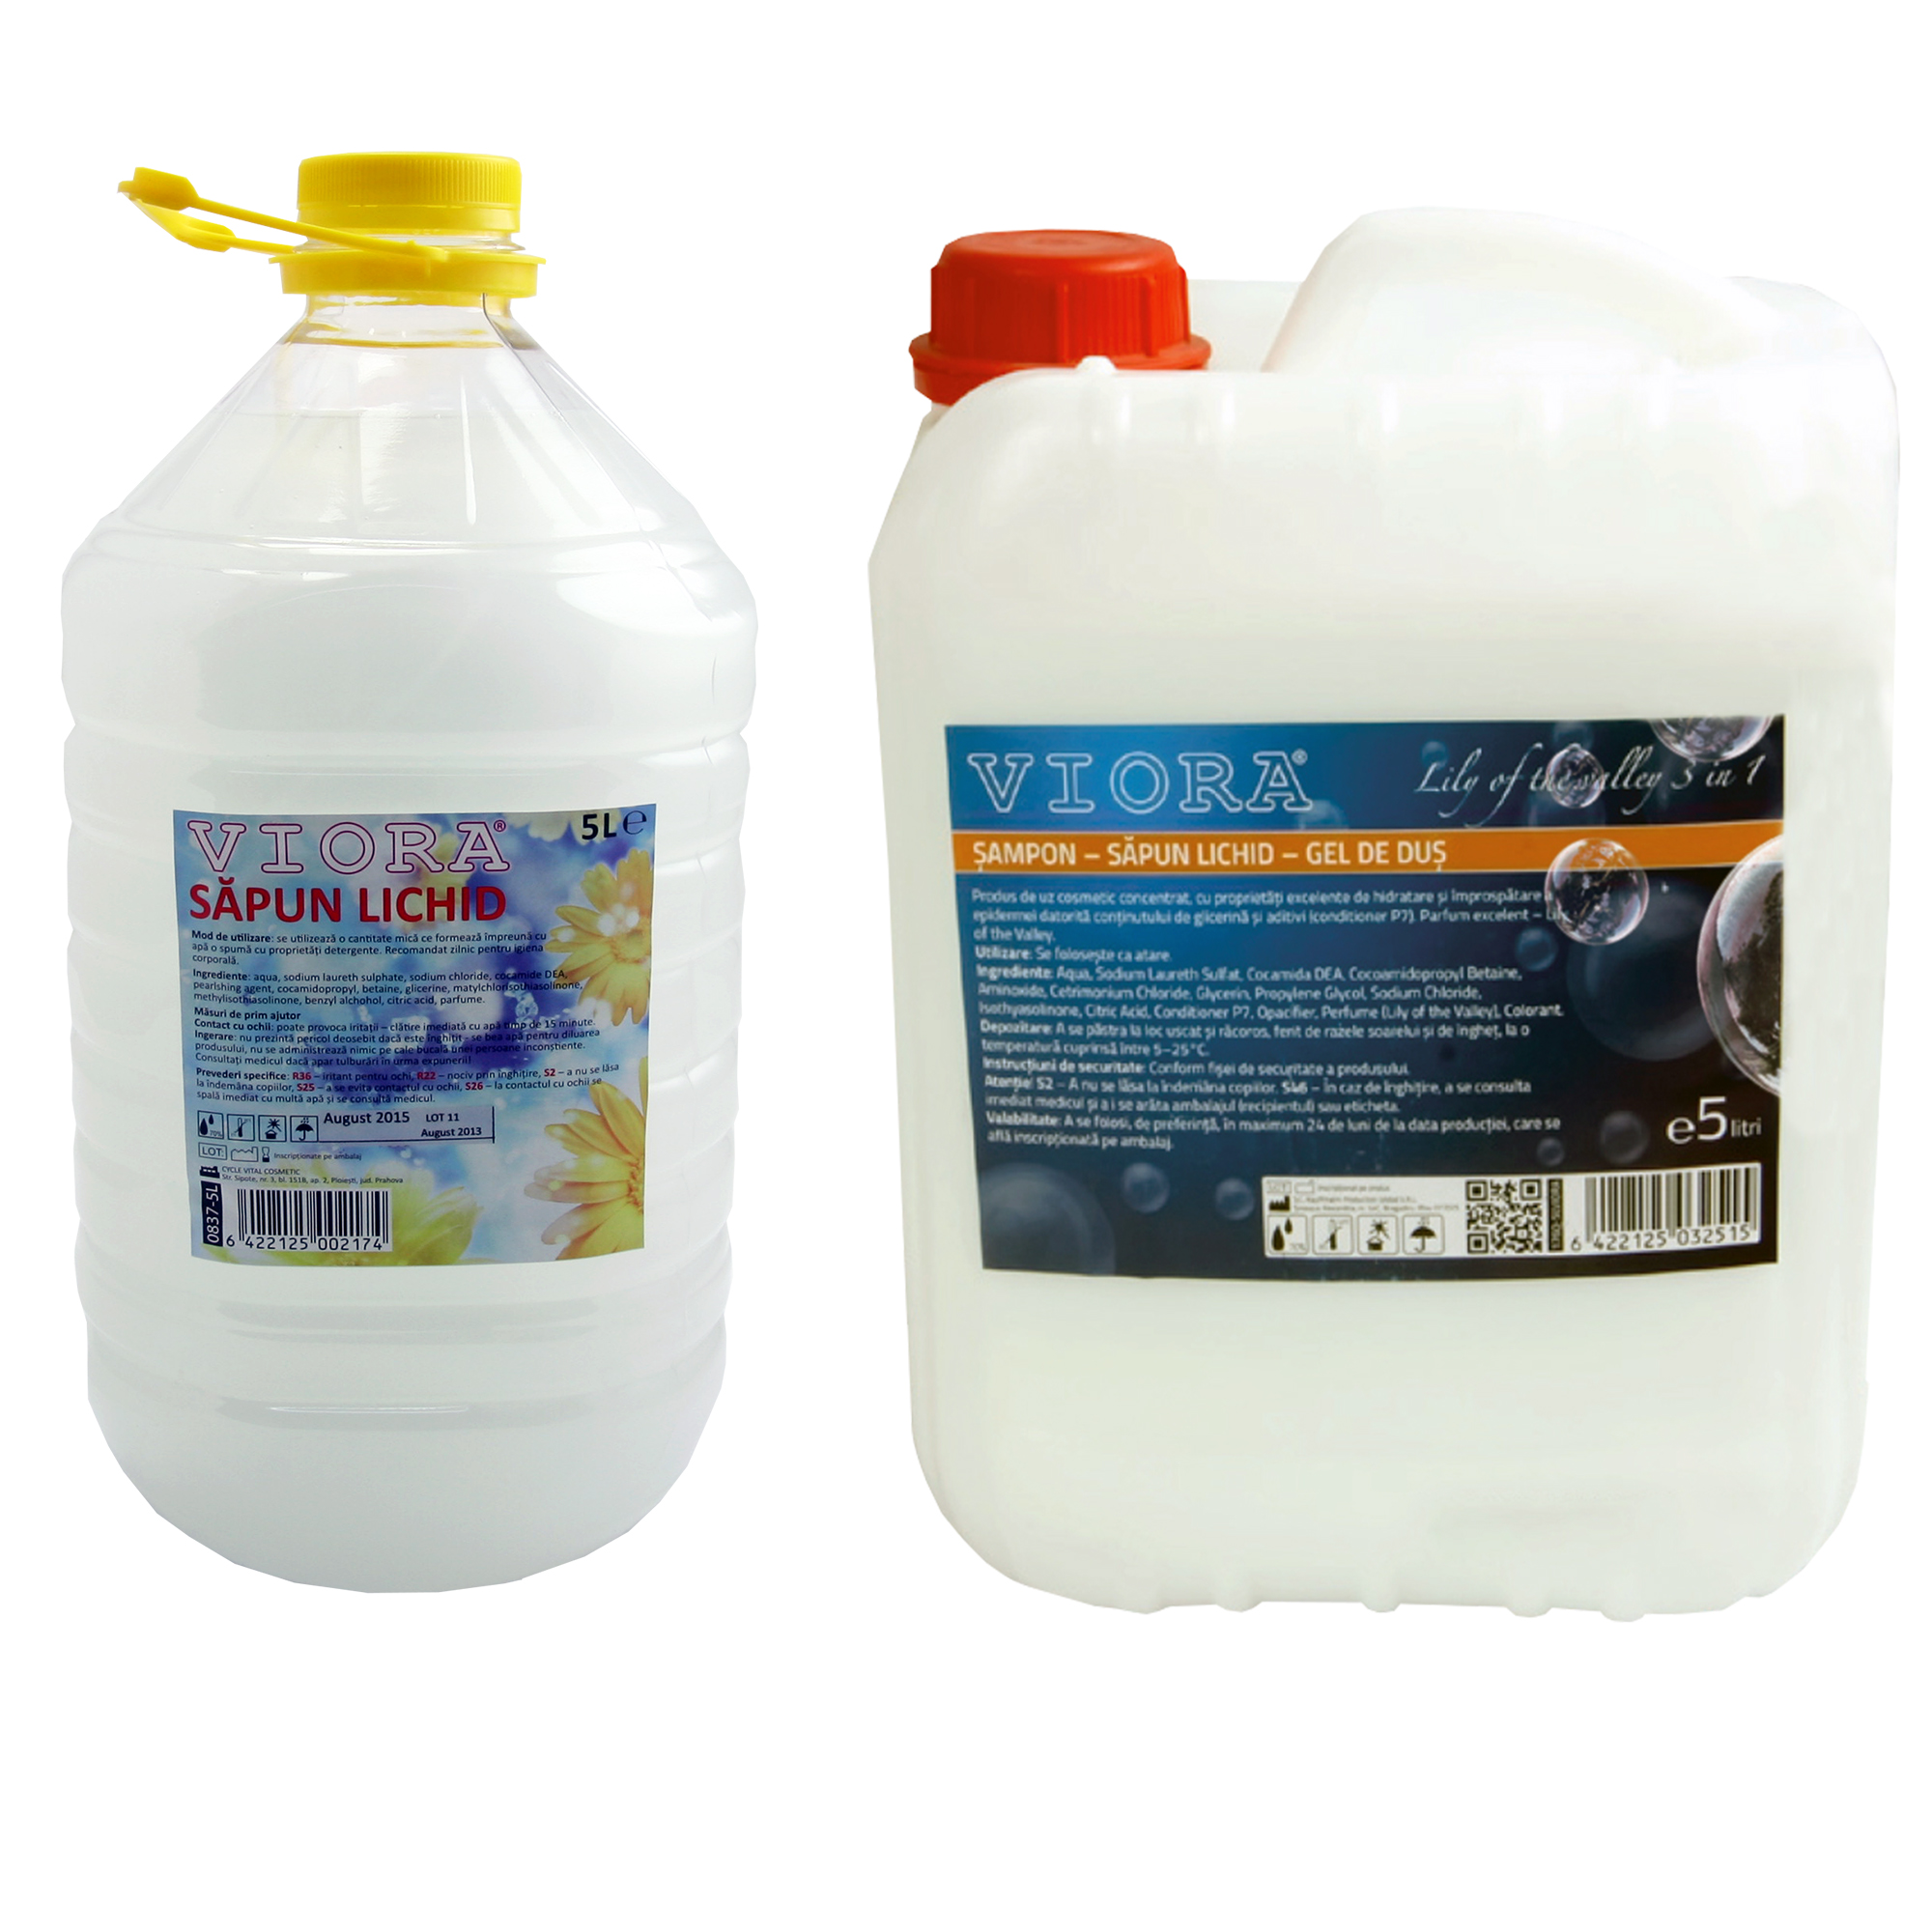 Cleaning and Housekeeping/DETERGENTS/Liquid Soap and Dispensers